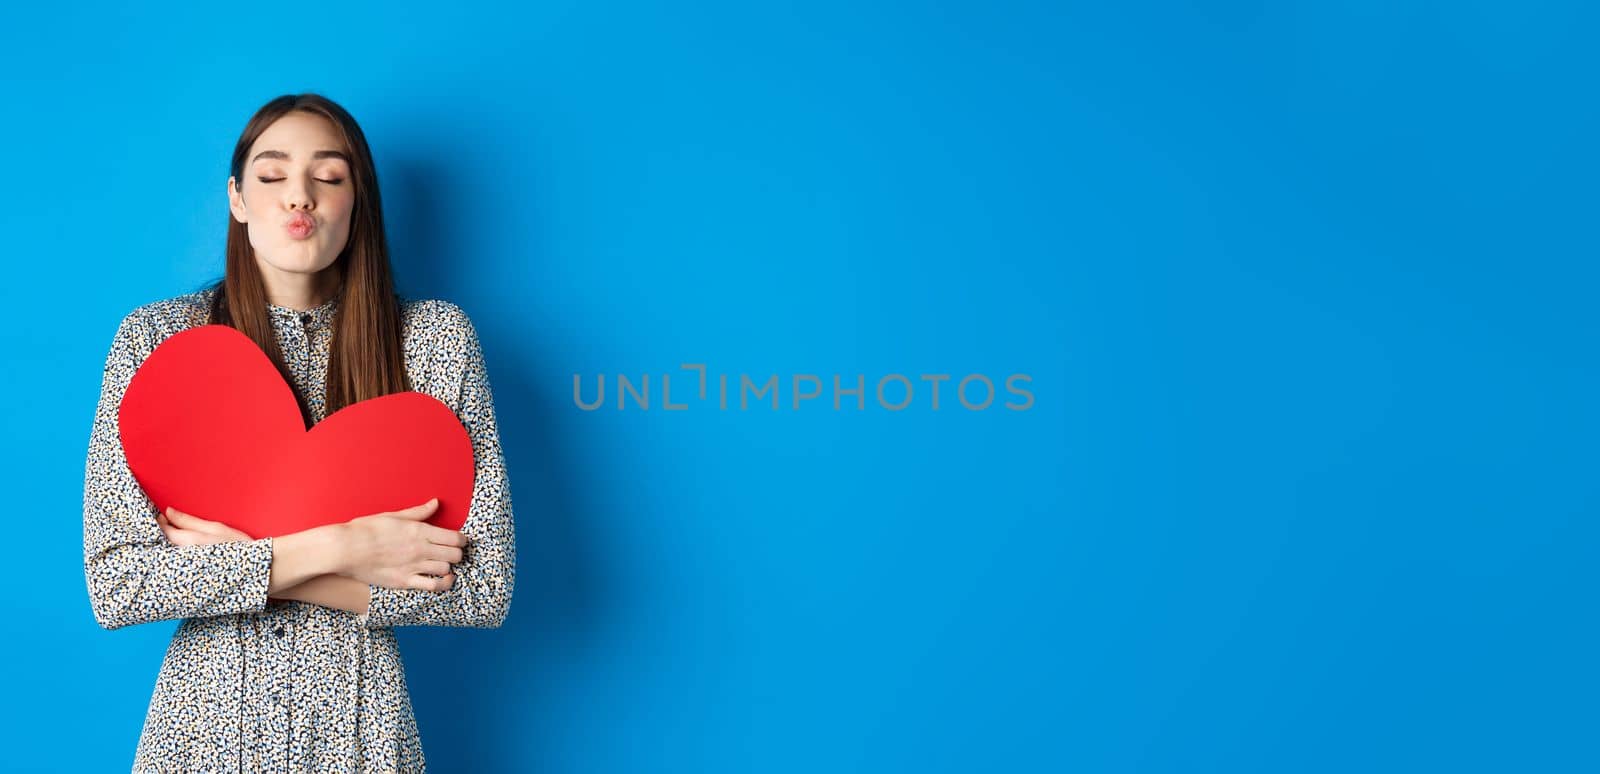 Valentines day. Romantic beautiful woman close eyes and pucker lips for kiss, holding big red heart cutout, kissing you, standing on blue background.